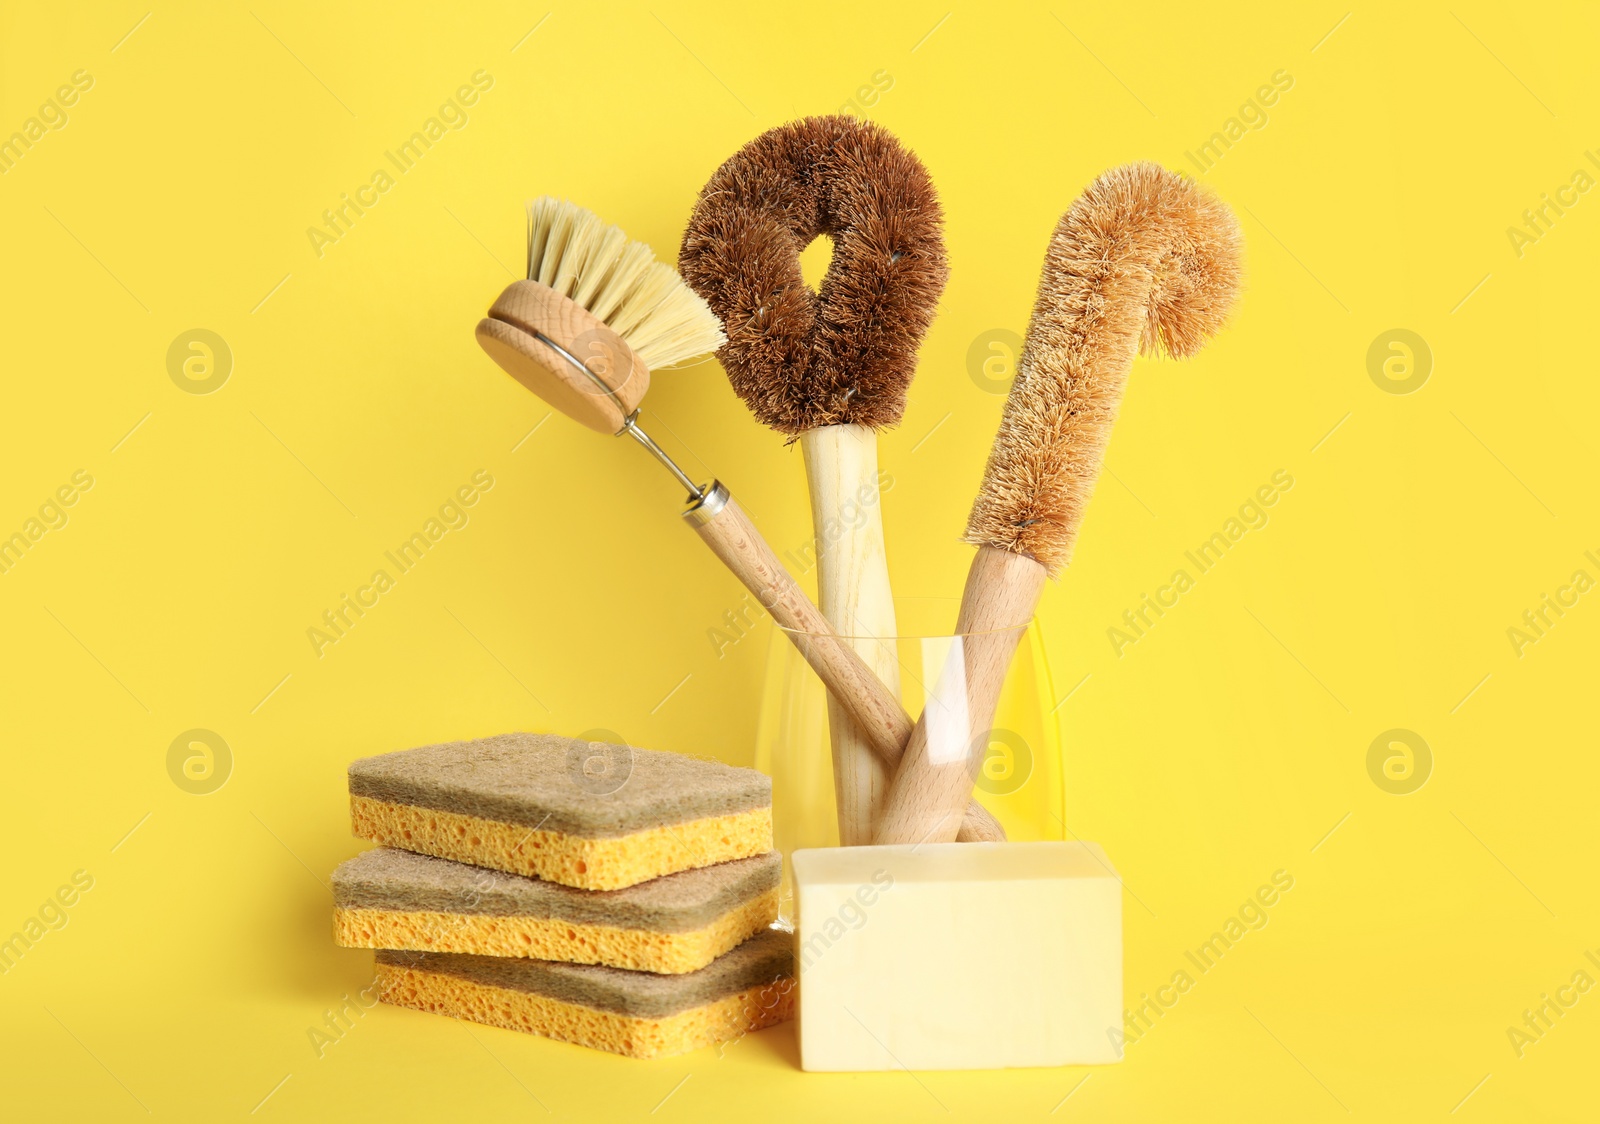 Photo of Cleaning supplies for dish washing on yellow background